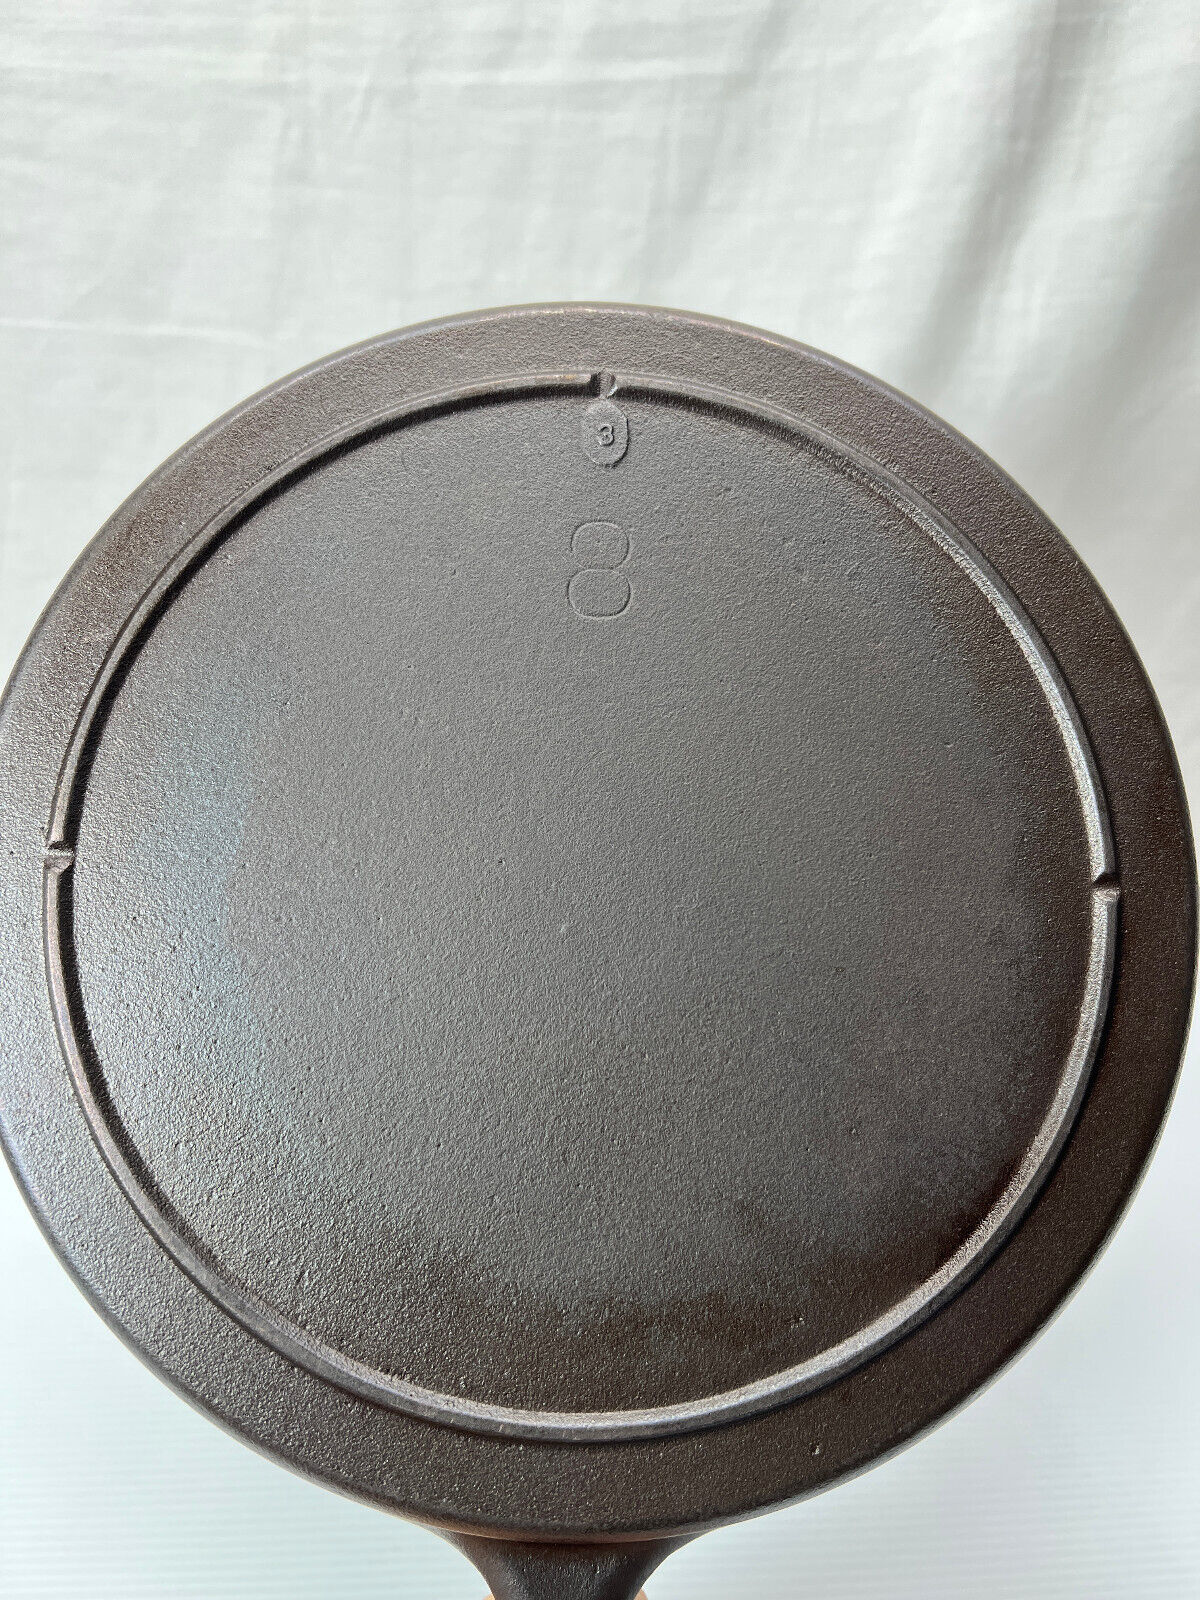 LODGE CAST IRON SKILLET EARLY #8 TAB WITH HEAT RING FULLY RESTORED SITS FLAT